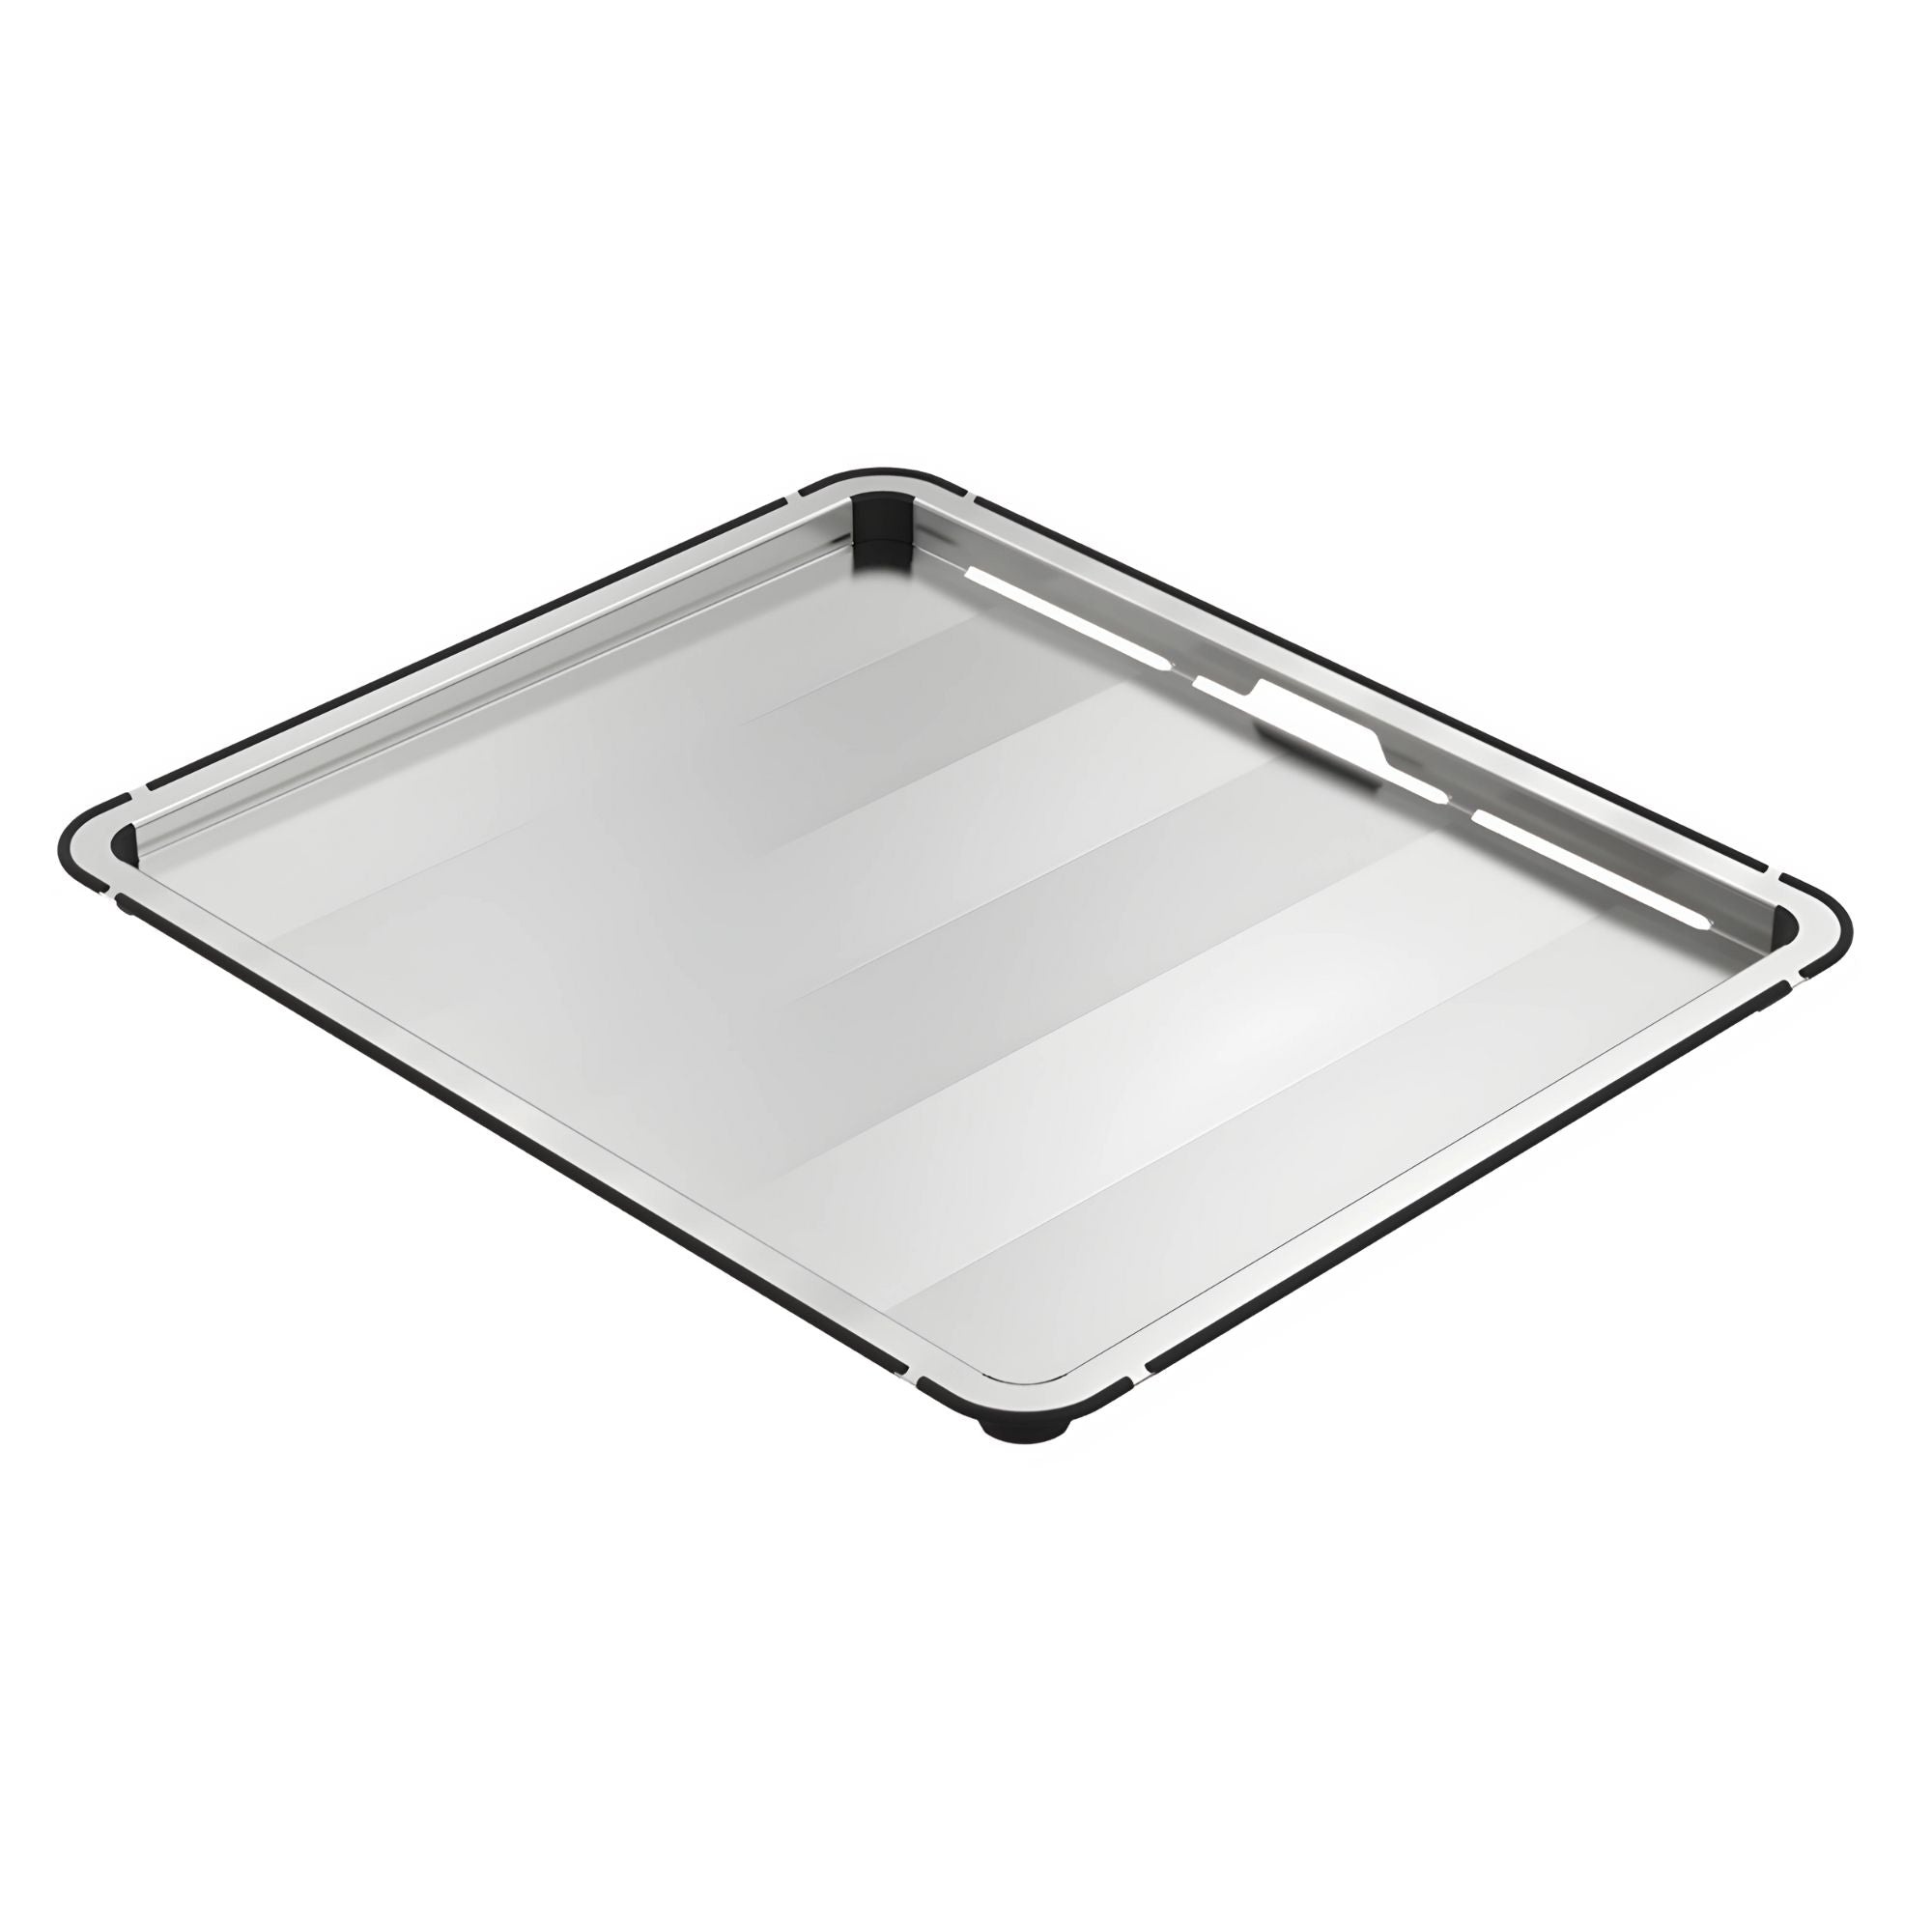 ABEY LUCIA 1 & 3/4 DOUBLE BOWL KITCHEN SINK STAINLESS STEEL 769MM